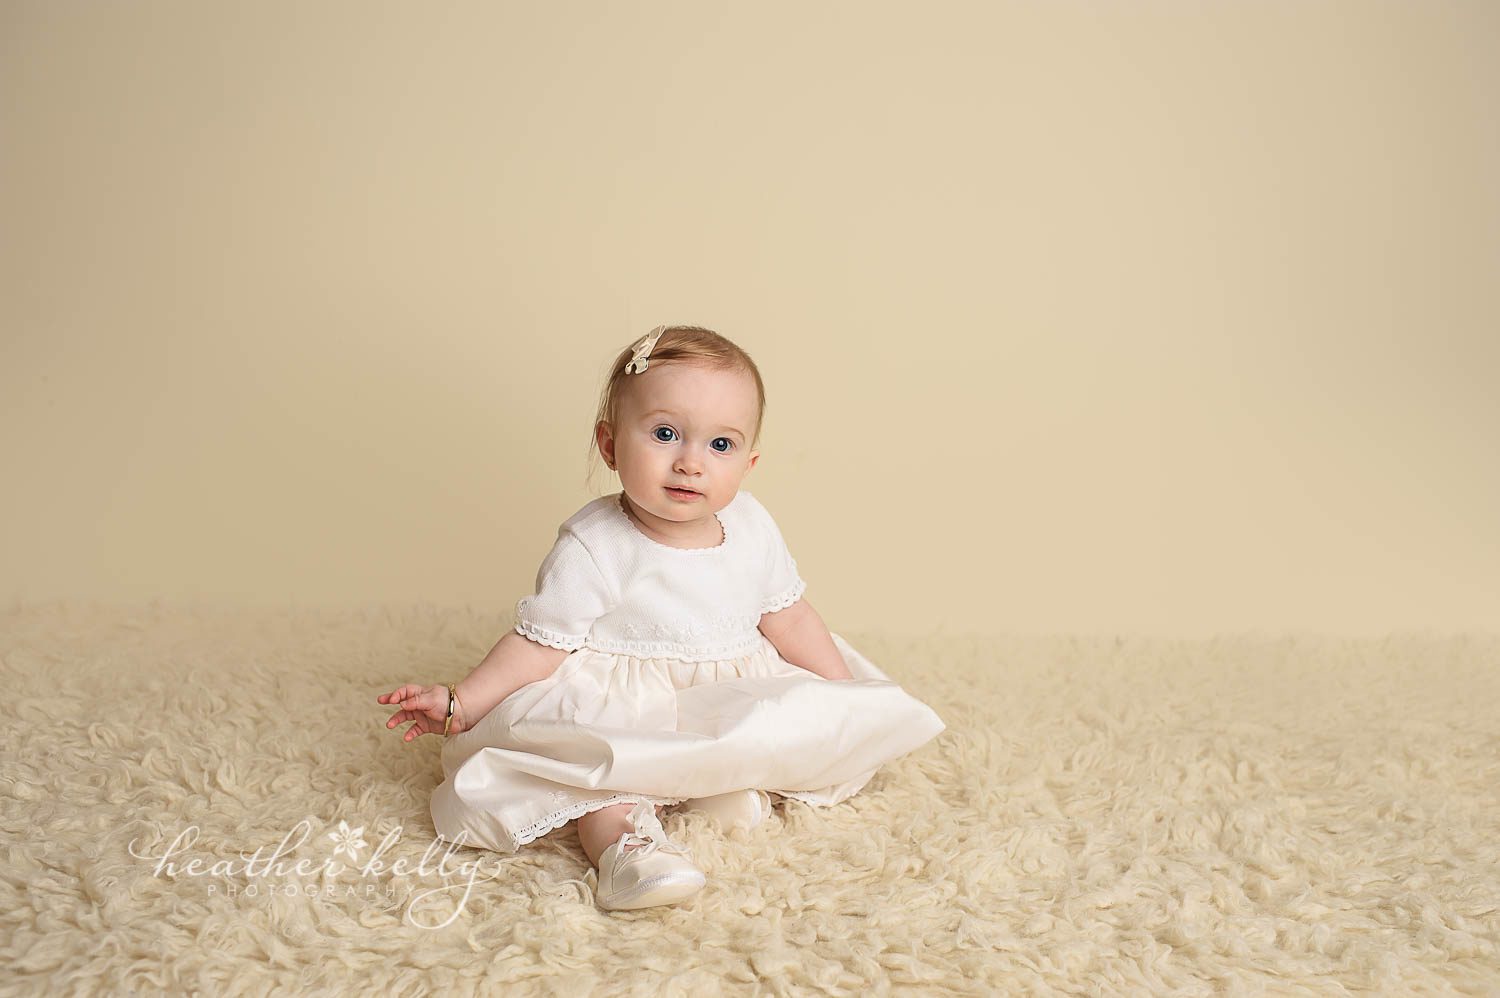 7 month old sitting for photography session. Baptism portrait photography CT baby photographer heather kelly photography